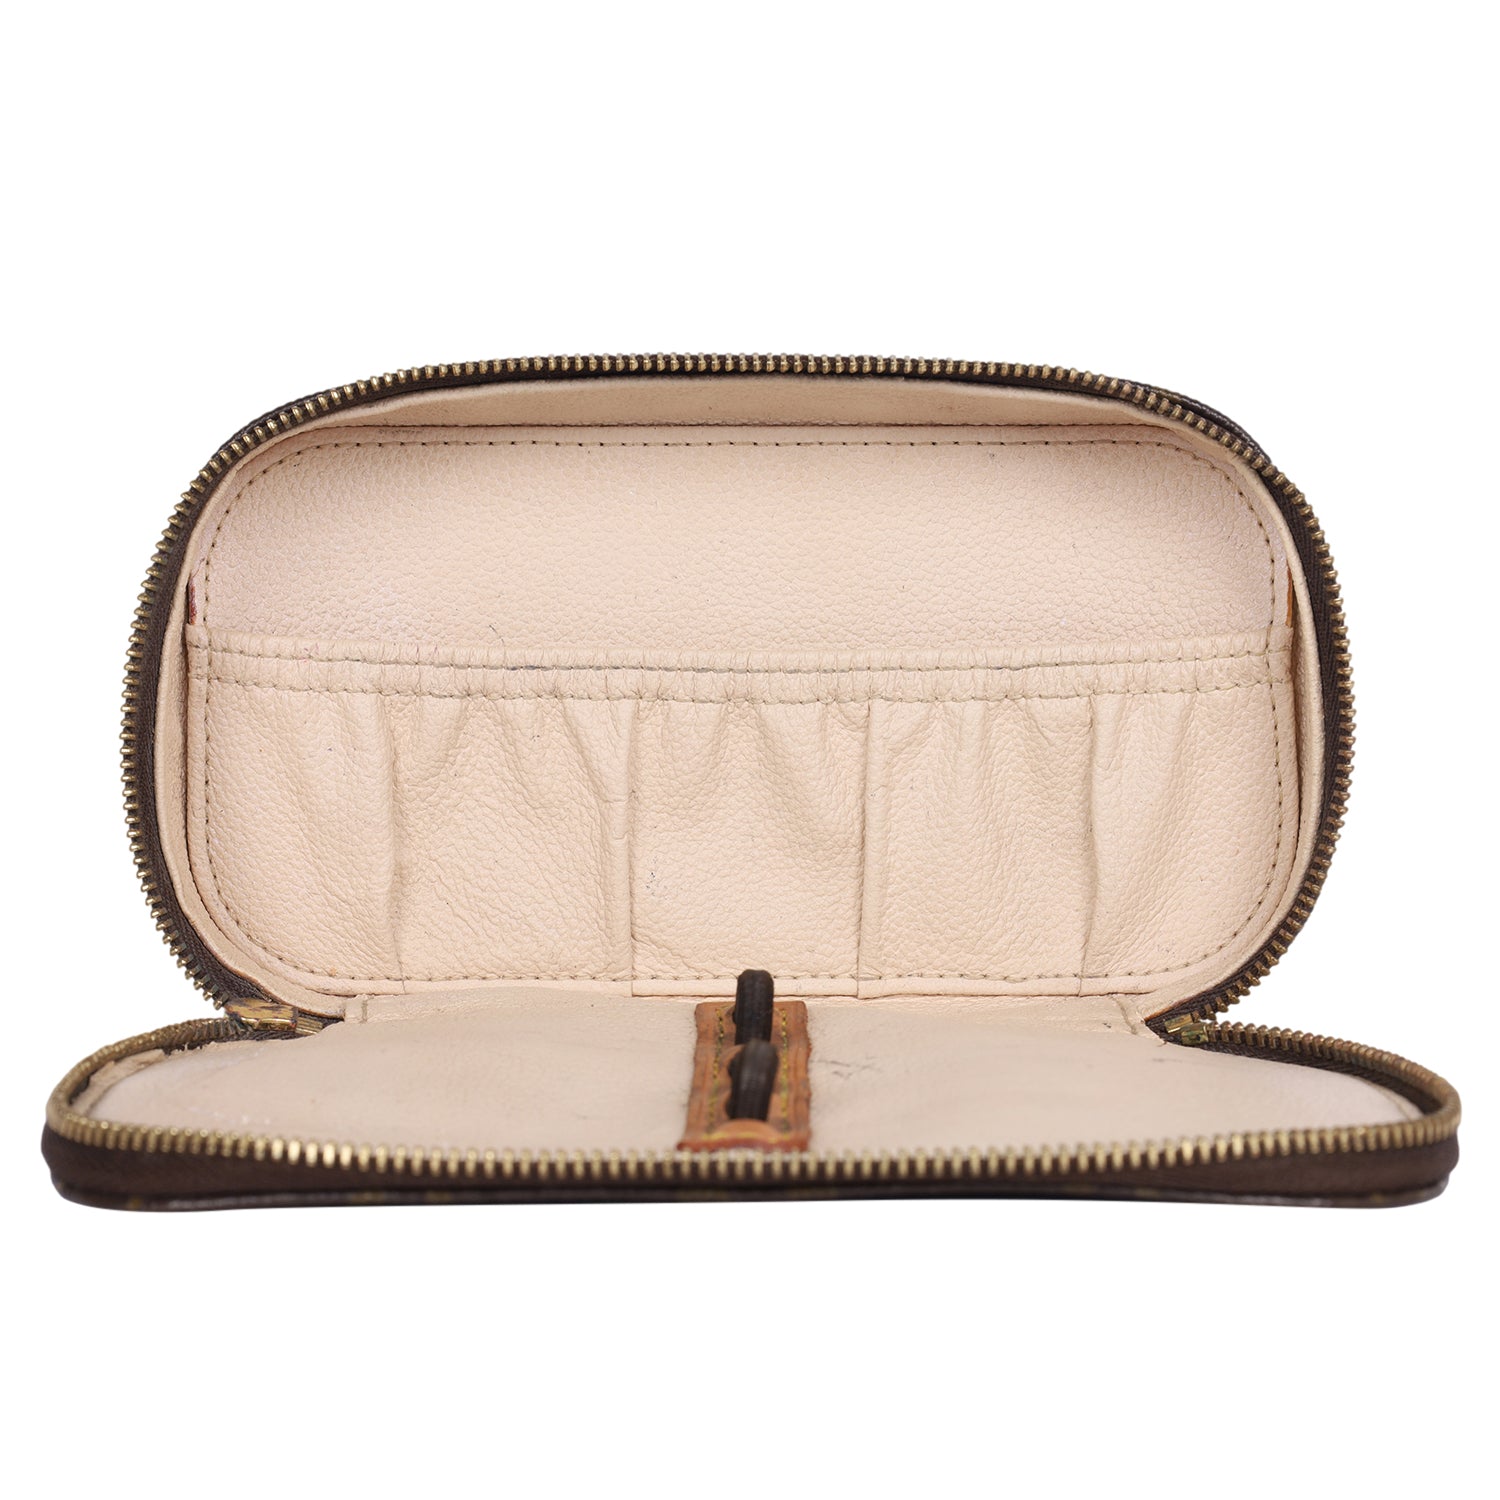 Tousse Blush PM Cosmetic Bag (Authentic Pre-Owned) – The Lady Bag